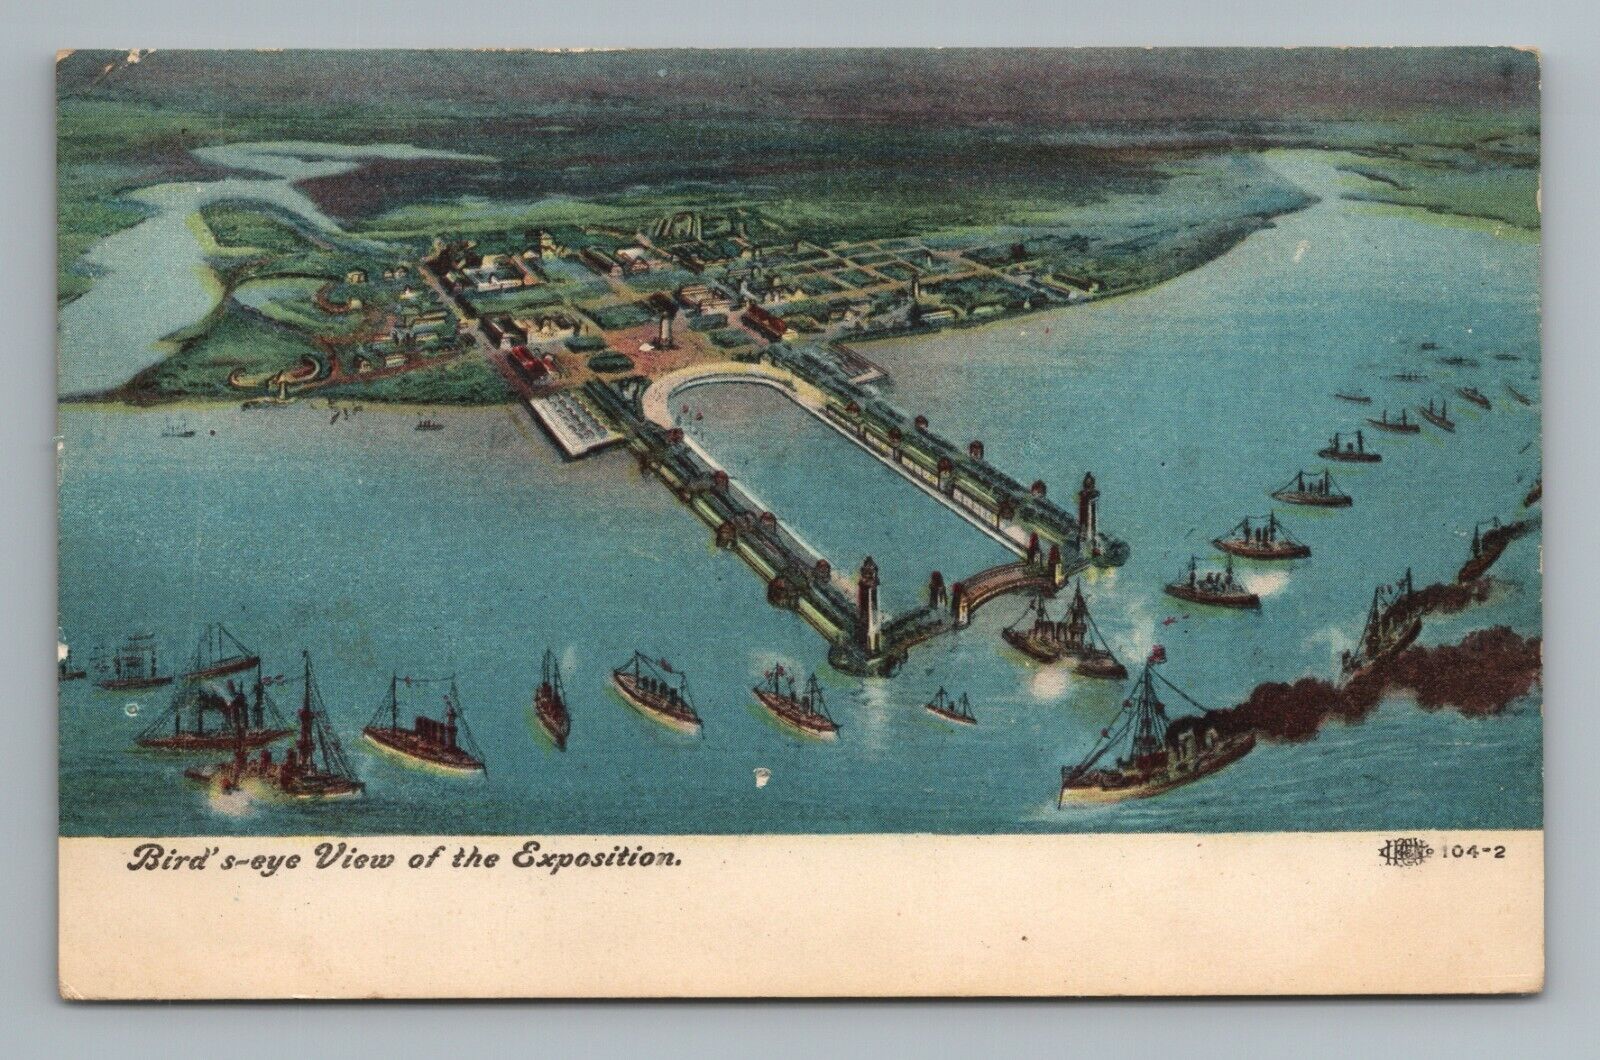 1907 Birdseye View of the Exposition Vintage Postcard